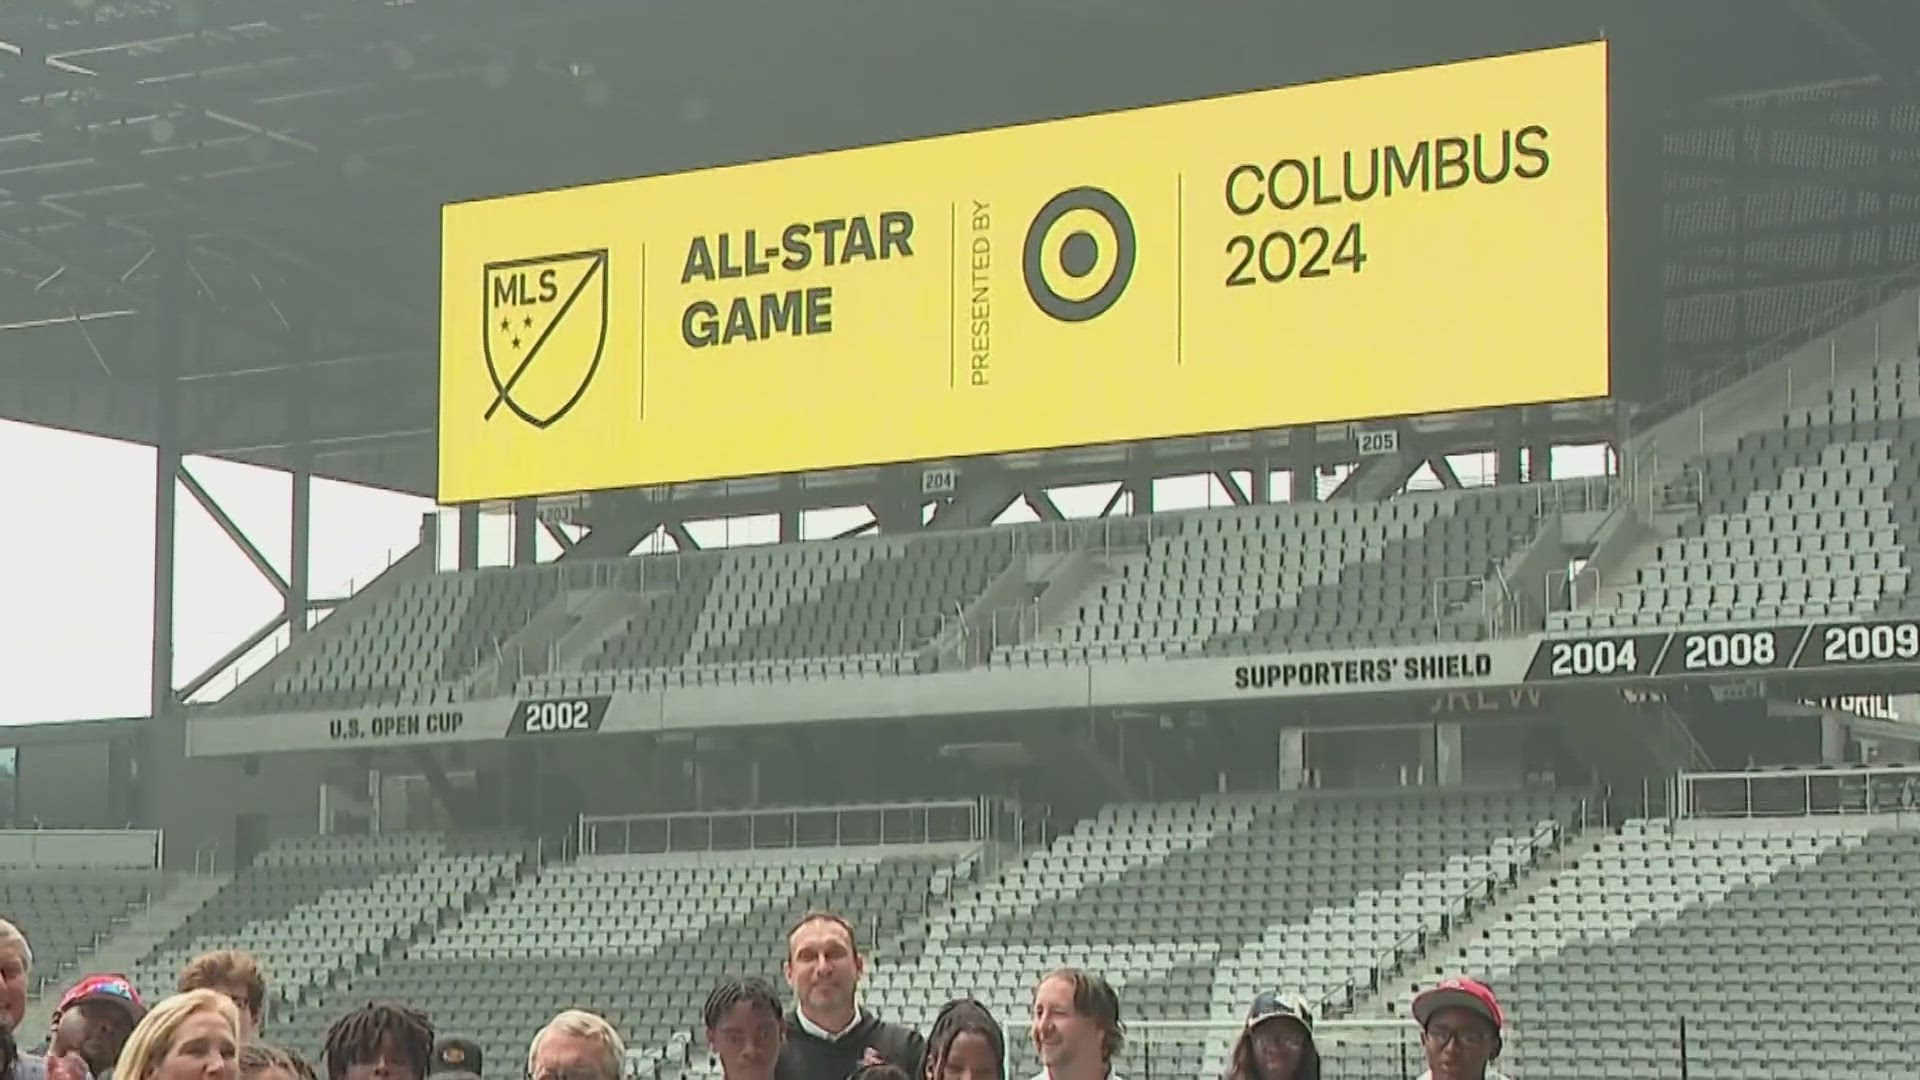 MLS All-Star Game: Everything You Need to Know About the Event